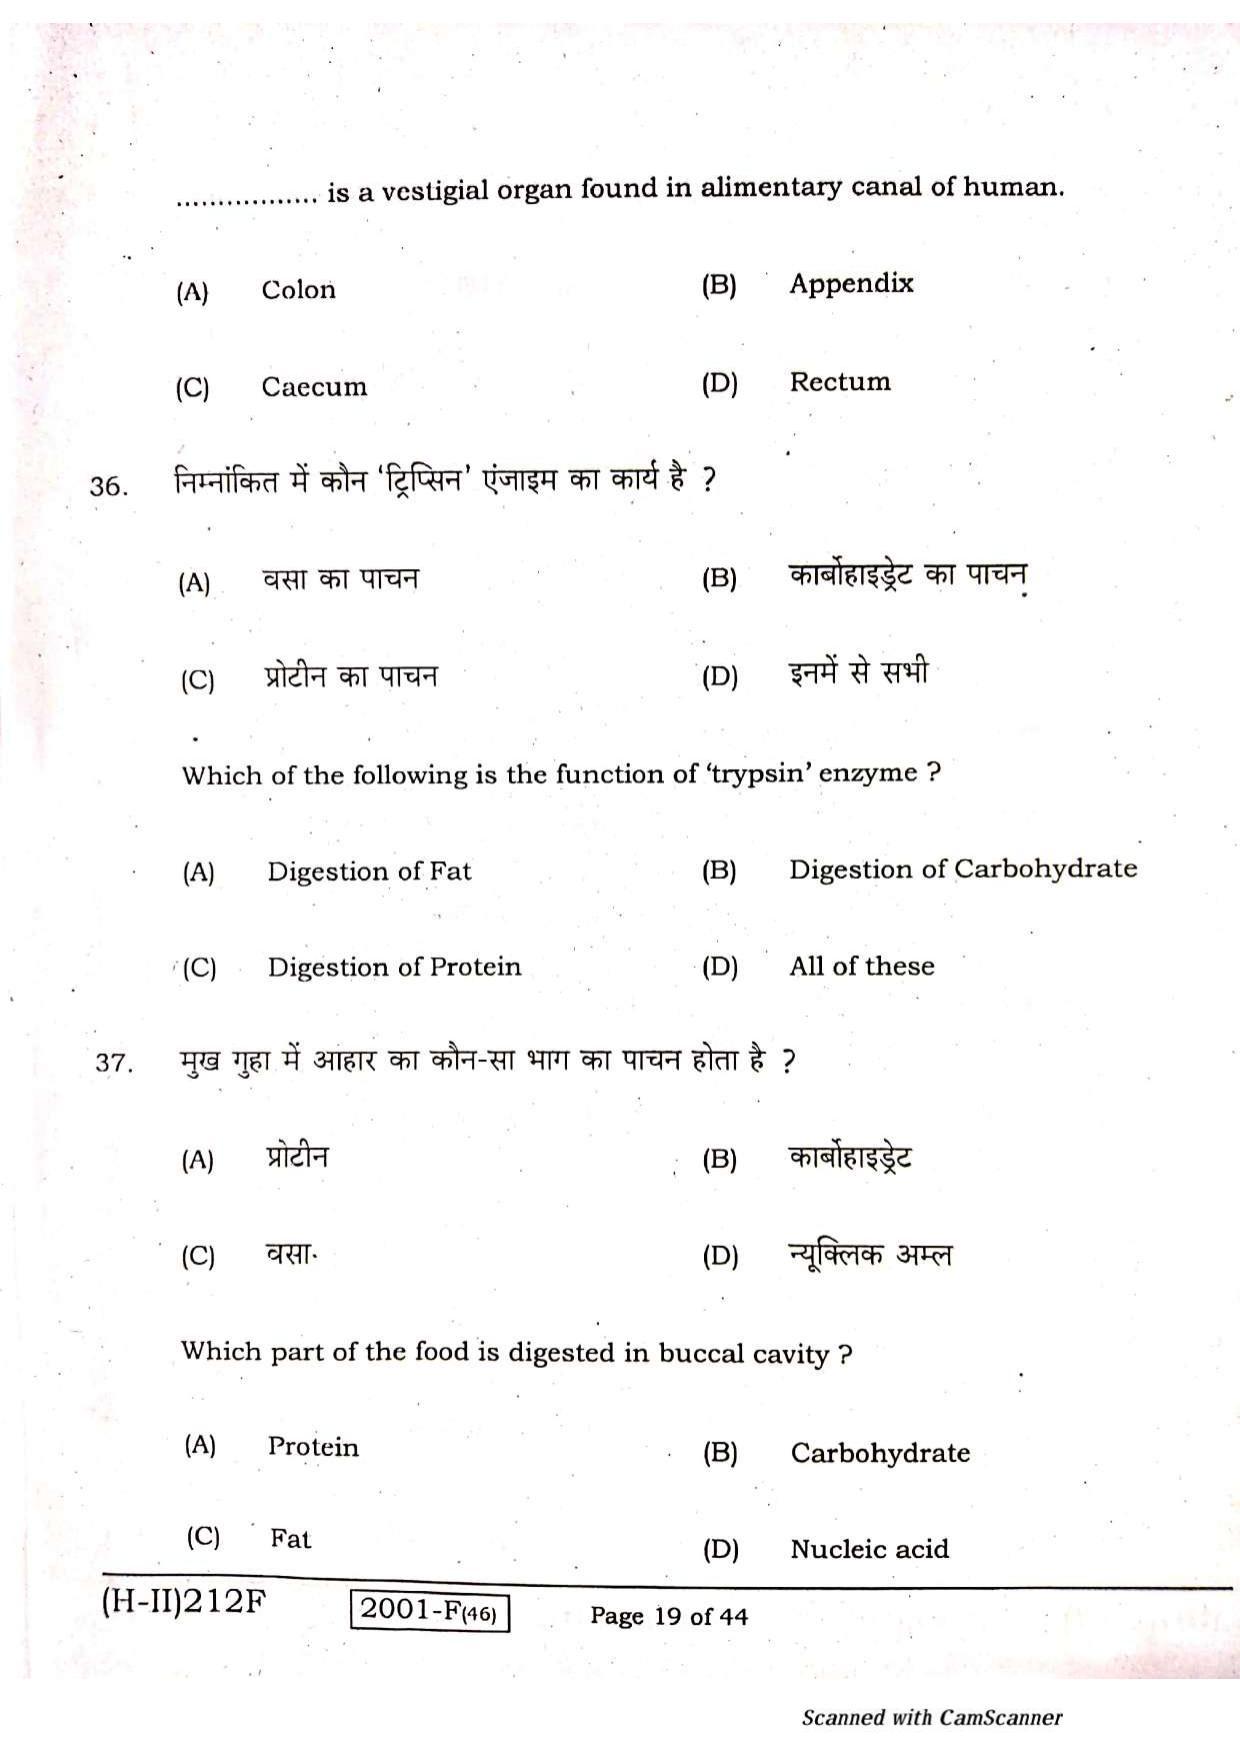 Bihar Board Class 10 Science 2021 (2nd Sitting) Question Paper - Page 17